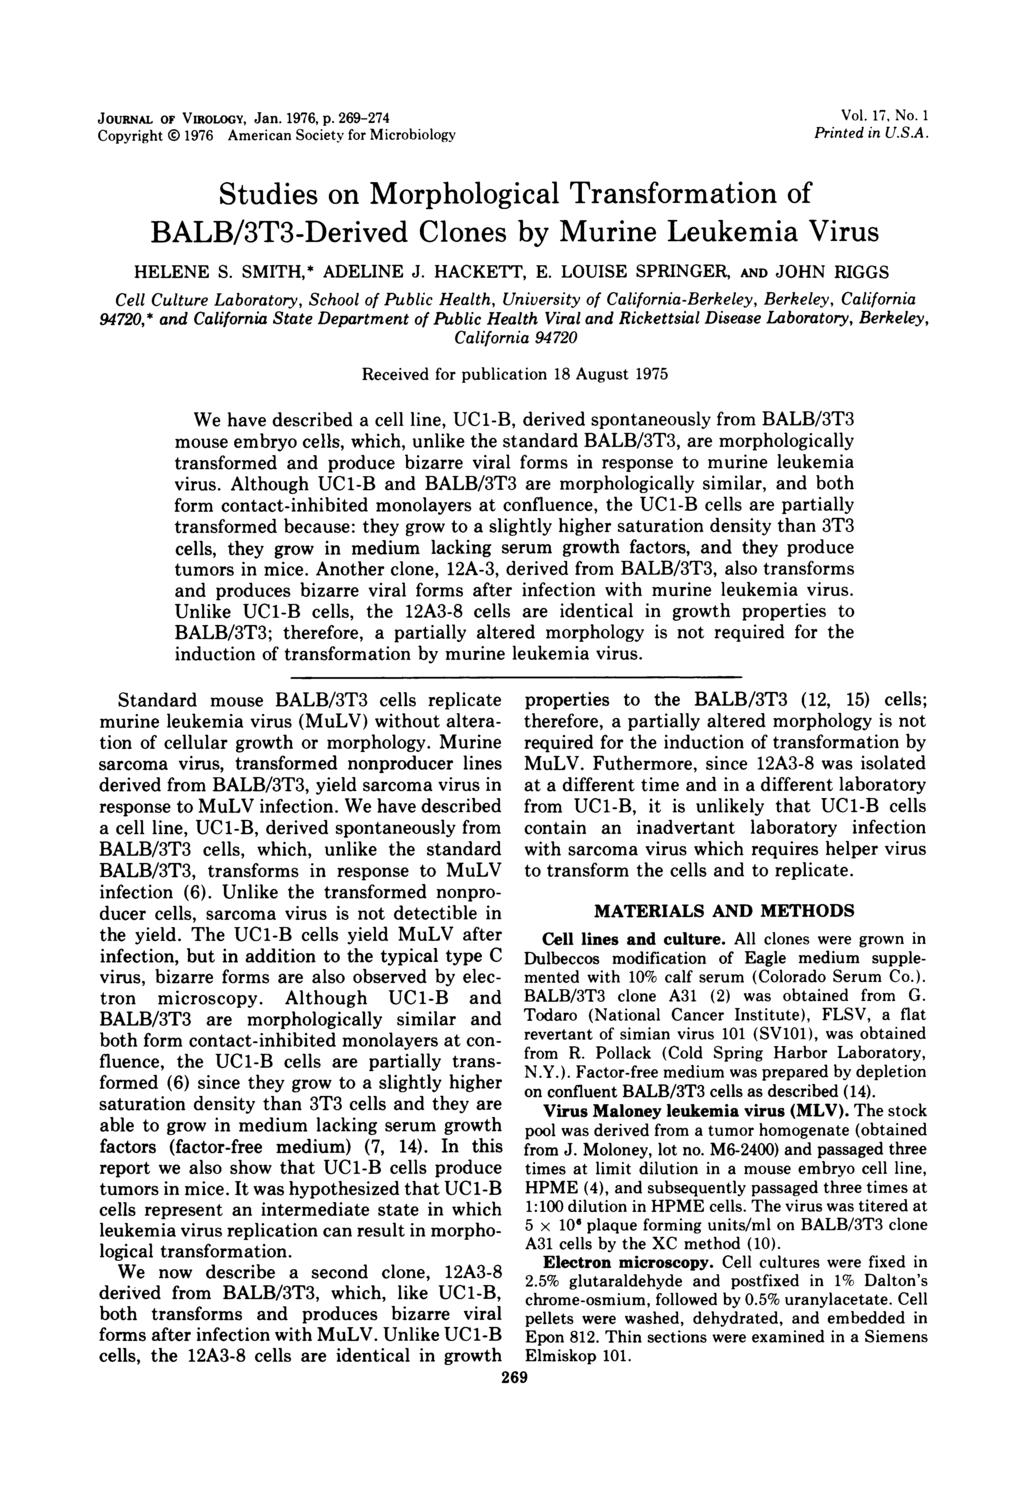 JouRNAL OF VIROLOGY, Jan. 1976, p. 269-274 Copyright ( 1976 American Society for Microbiology Vol. 17, No. 1 Printed in U.S.A. Studies on Morphological Transformation of BALB/3T3-Derived Clones by Murine Leukemia Virus HELENE S.